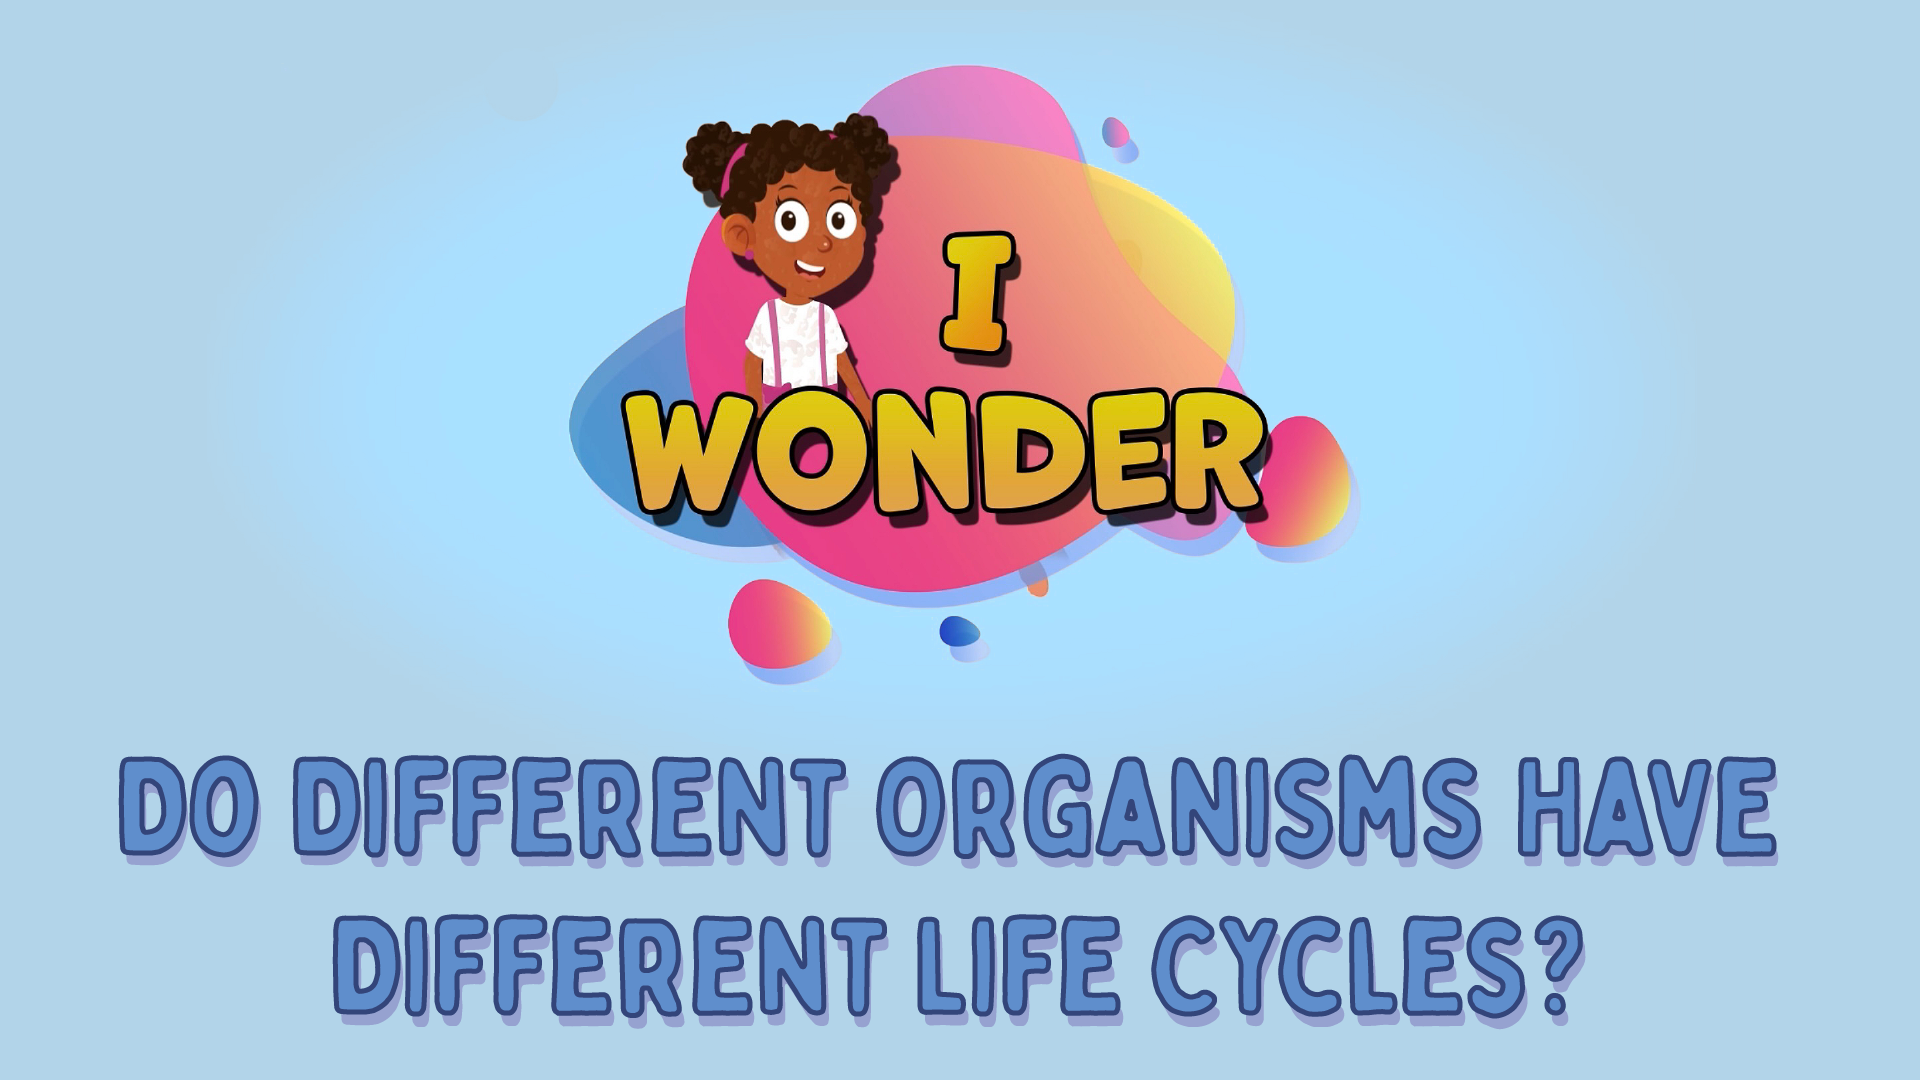 Do Different Organisms Have Different Life Cycles?